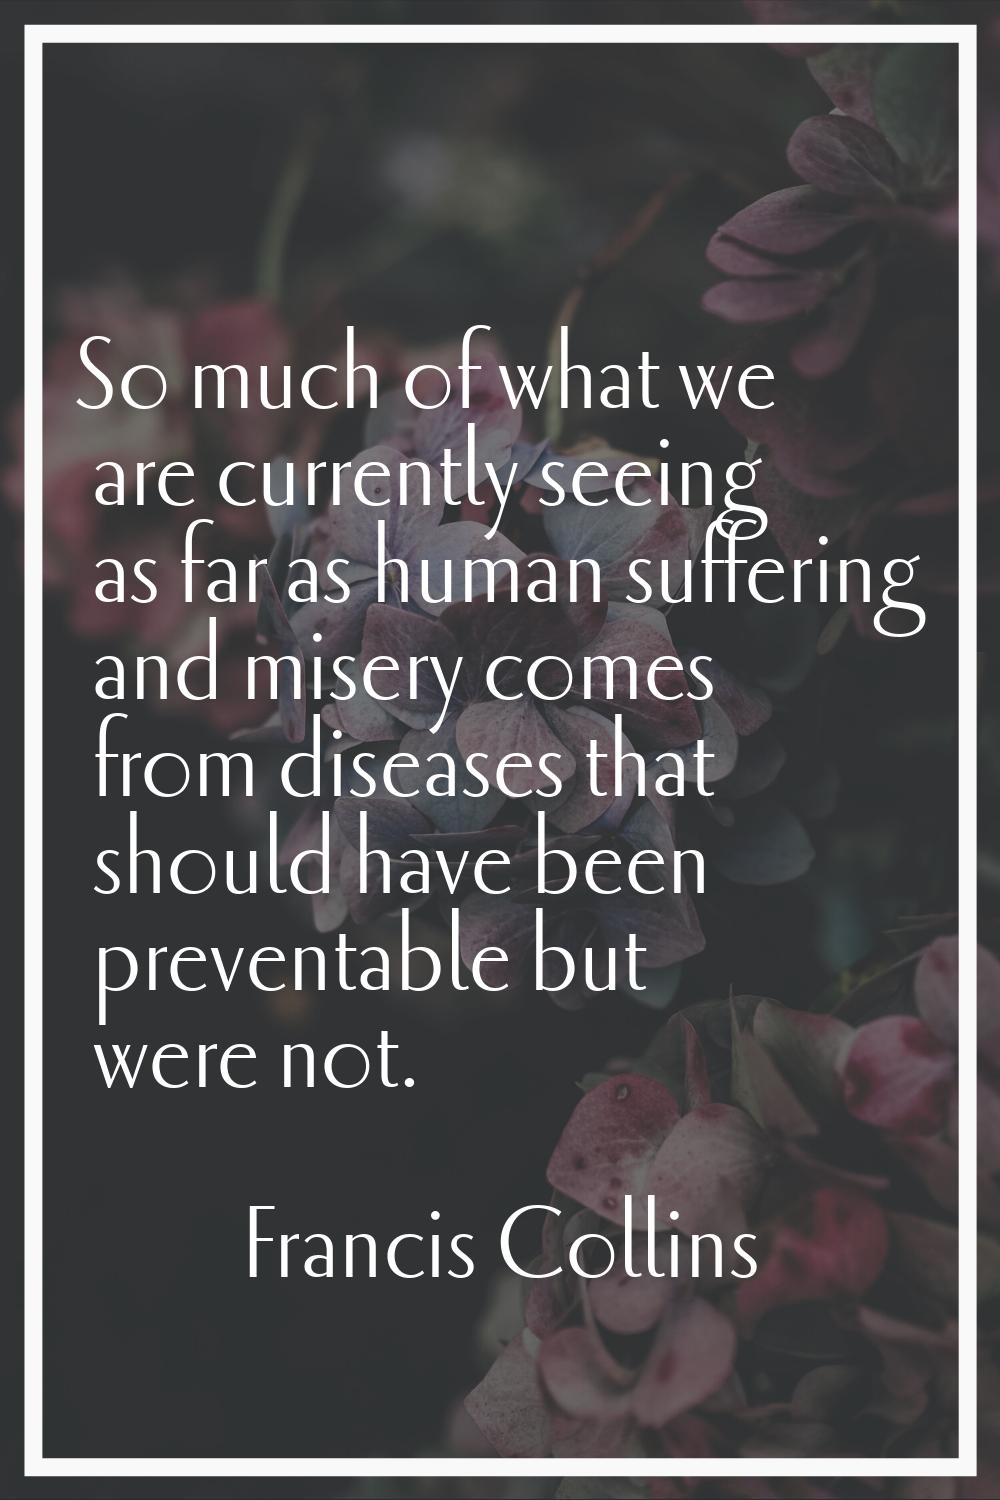 So much of what we are currently seeing as far as human suffering and misery comes from diseases th